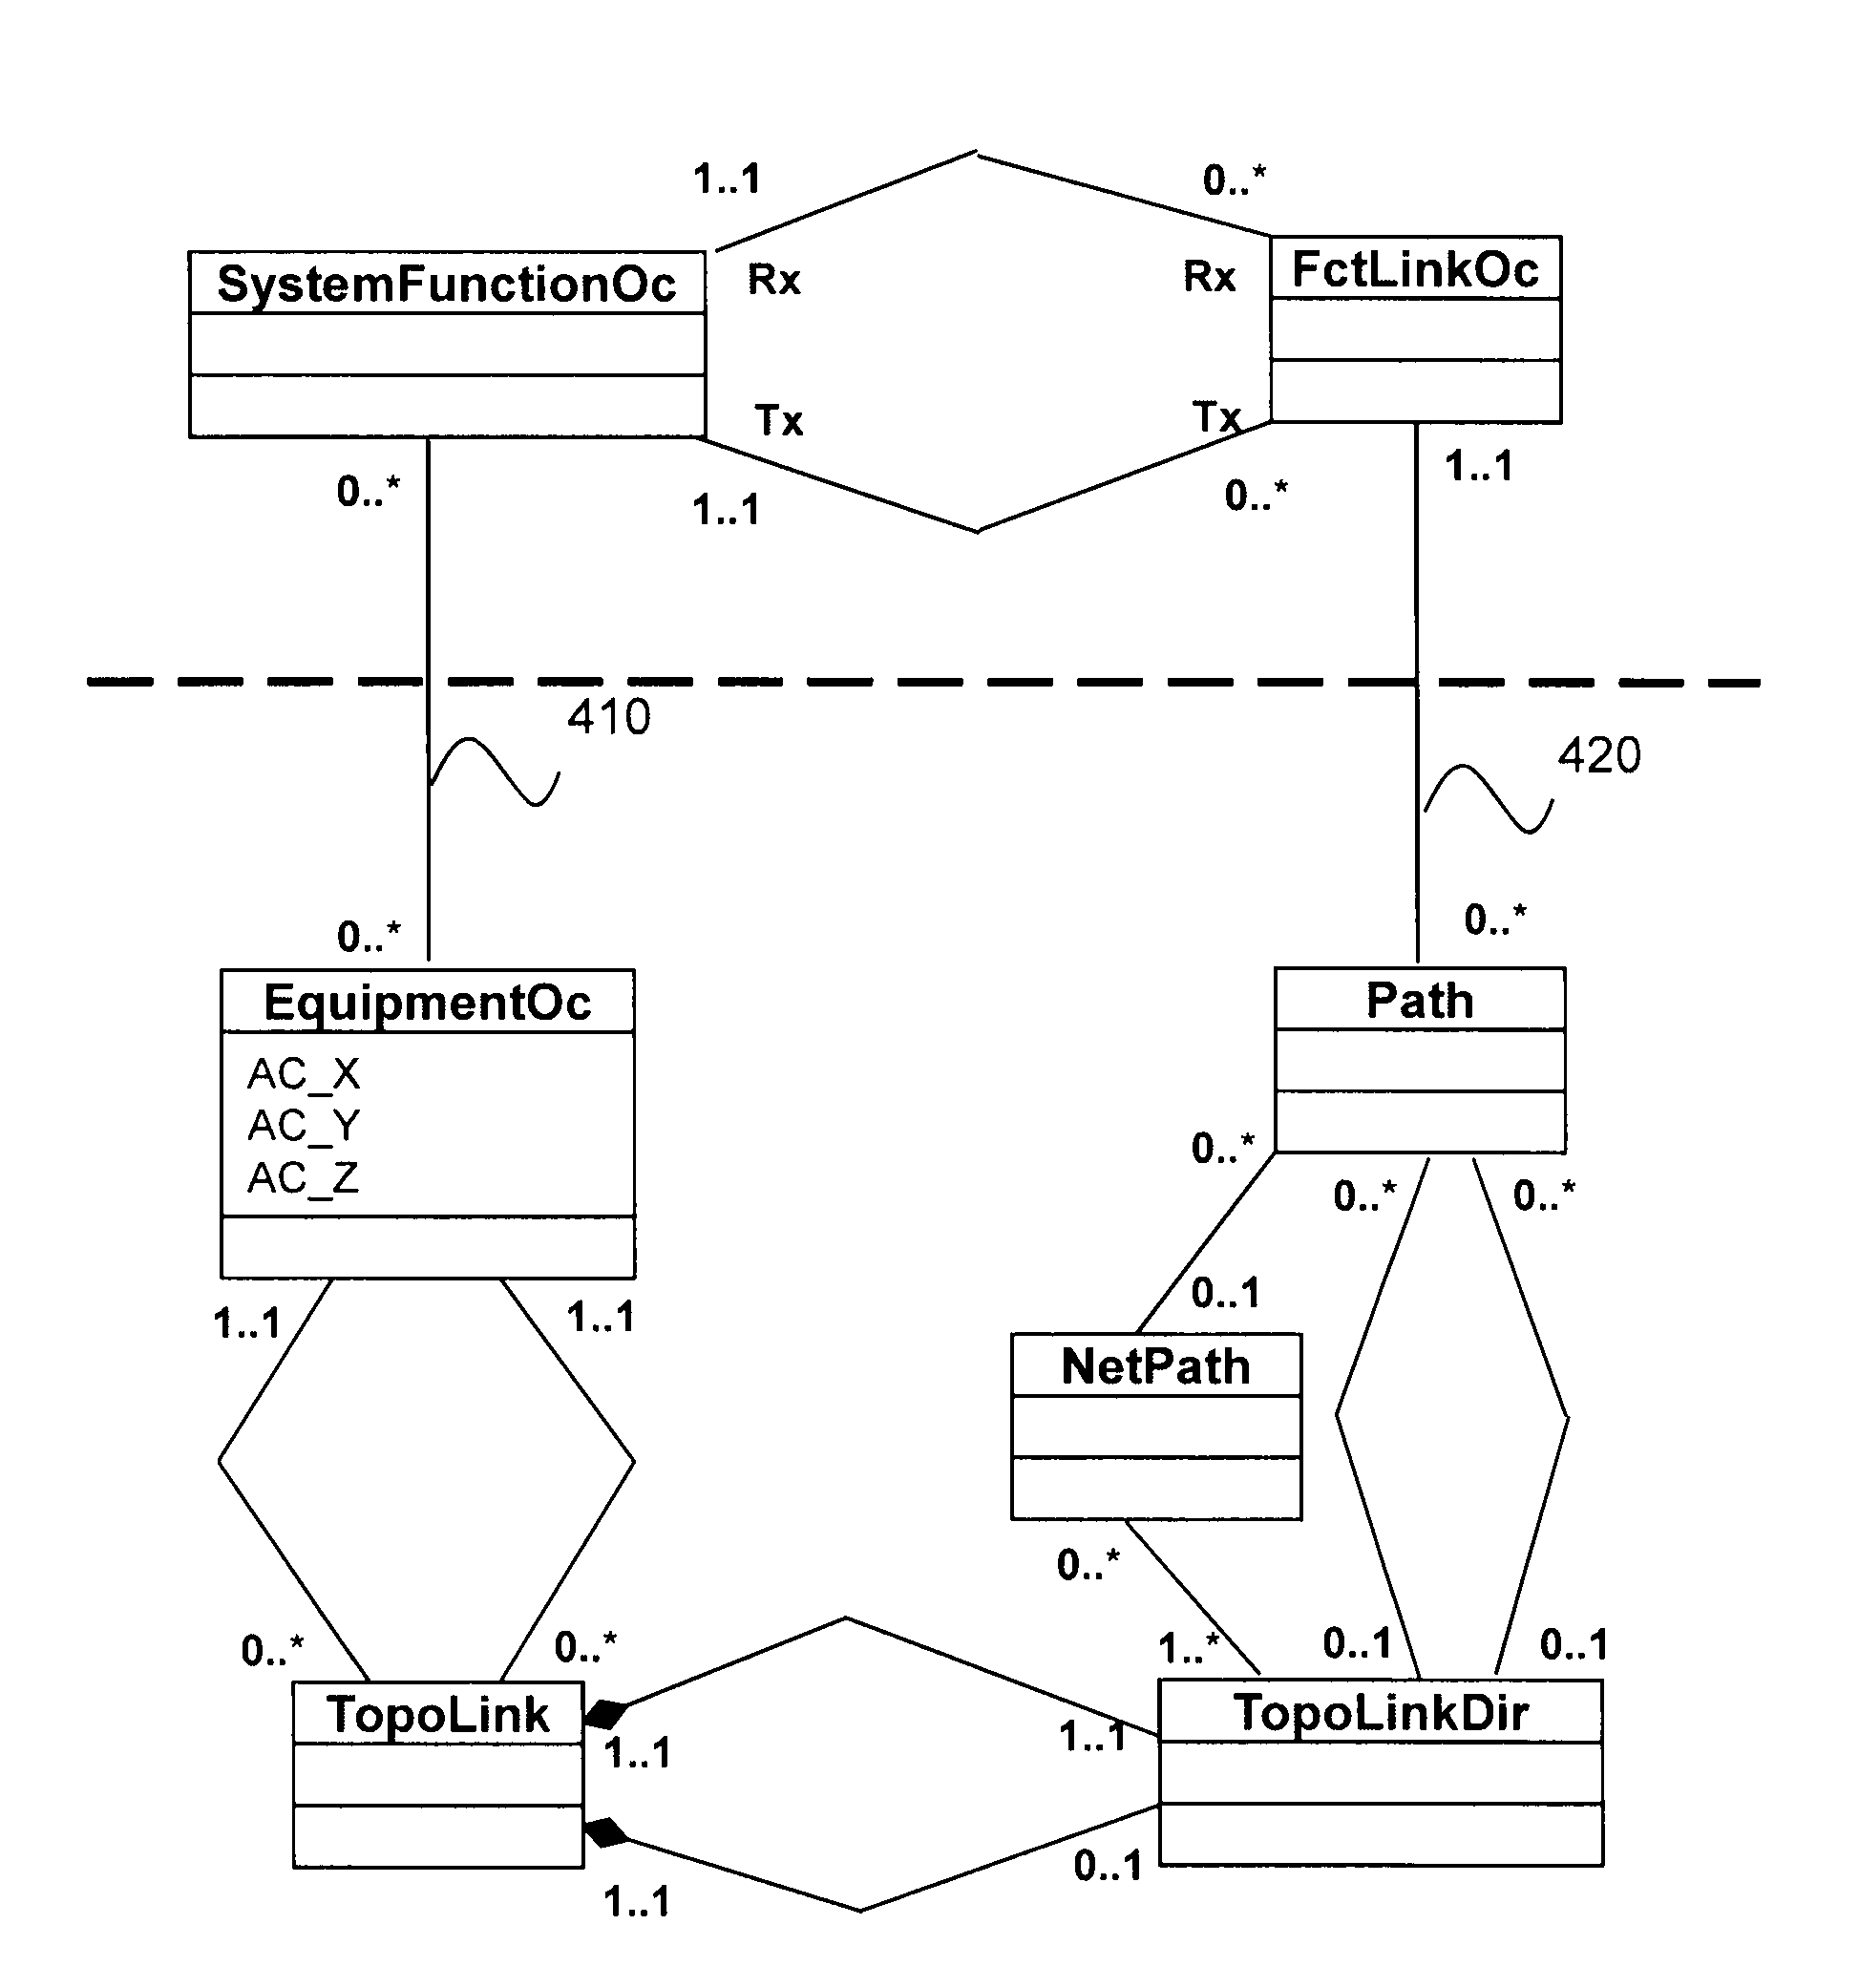 Method for assistance with the construction and validation of an avionics platform